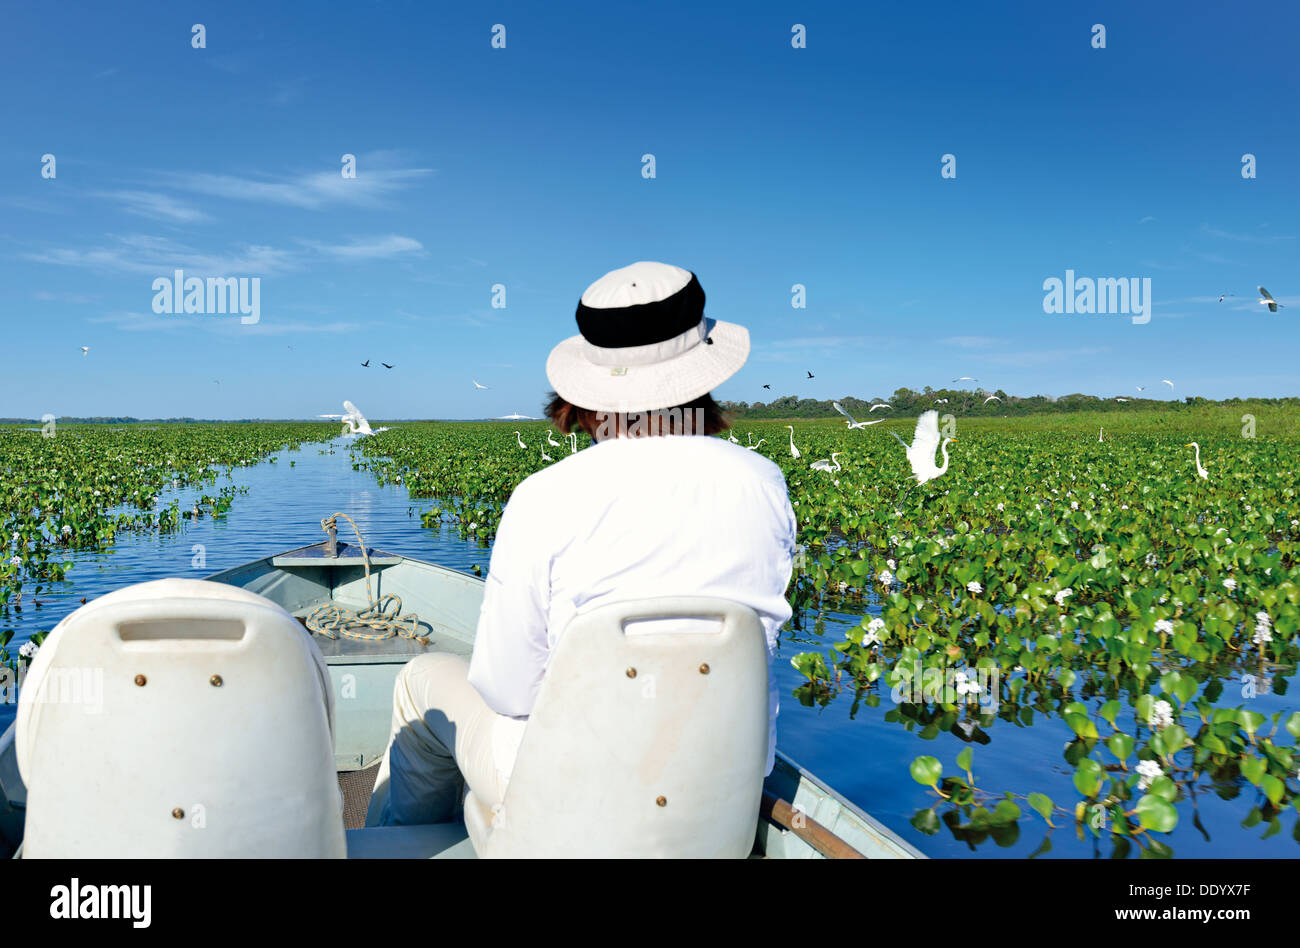 Brazil, Pantanal: Woman with hat on a boat trip through a lake with waterlilies observing birds Stock Photo